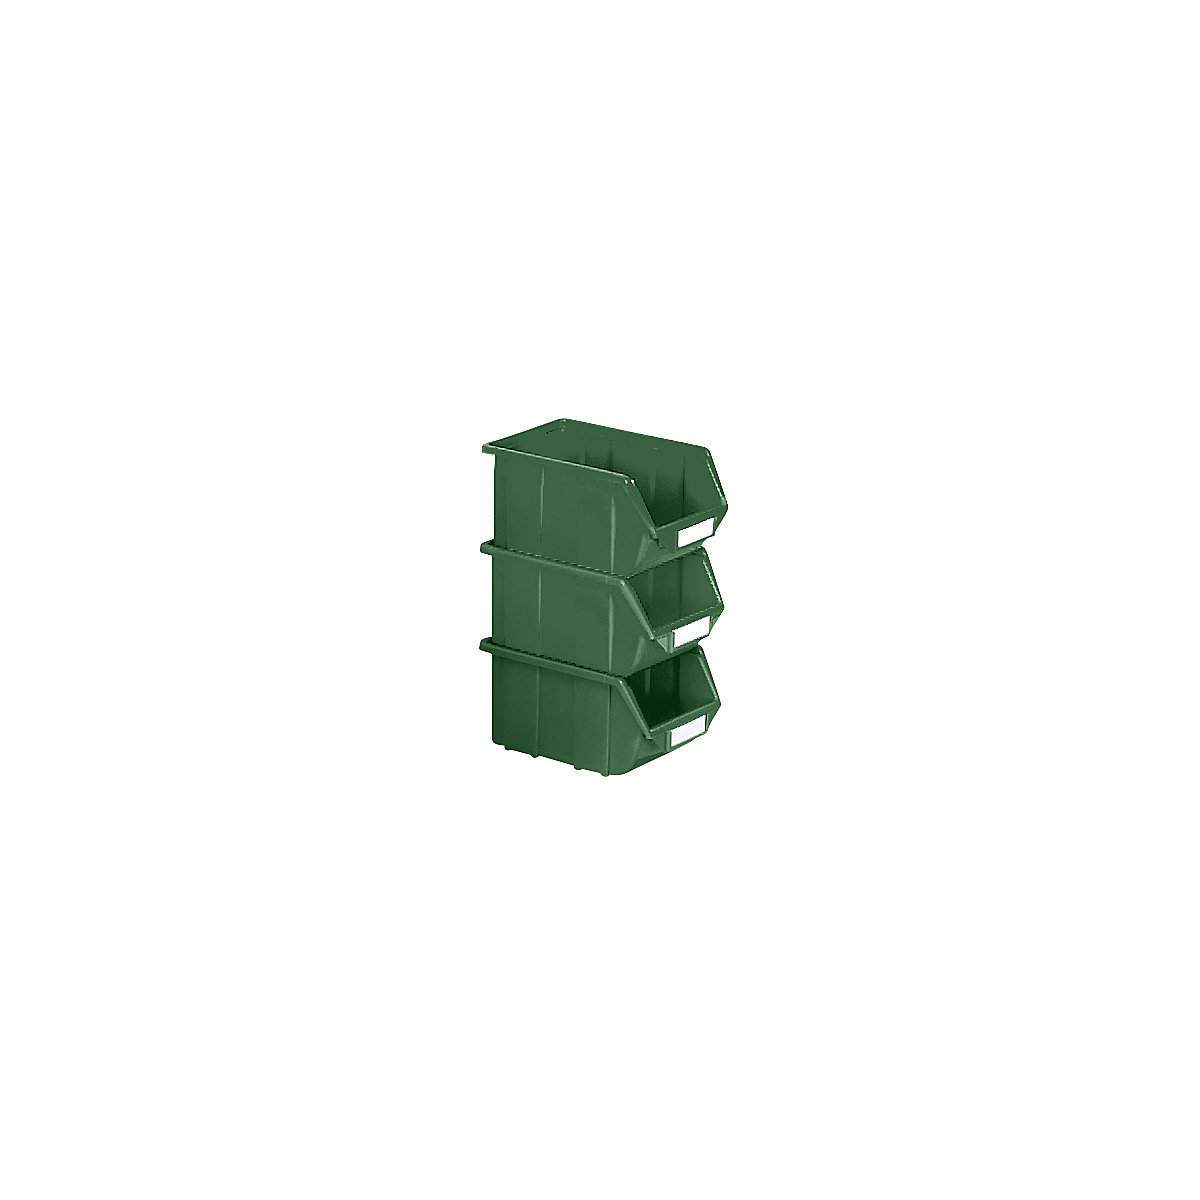 Open fronted storage bin made of polypropylene, LxWxH 125 x 113 x 64 mm, pack of 30, green, pack of 30-7